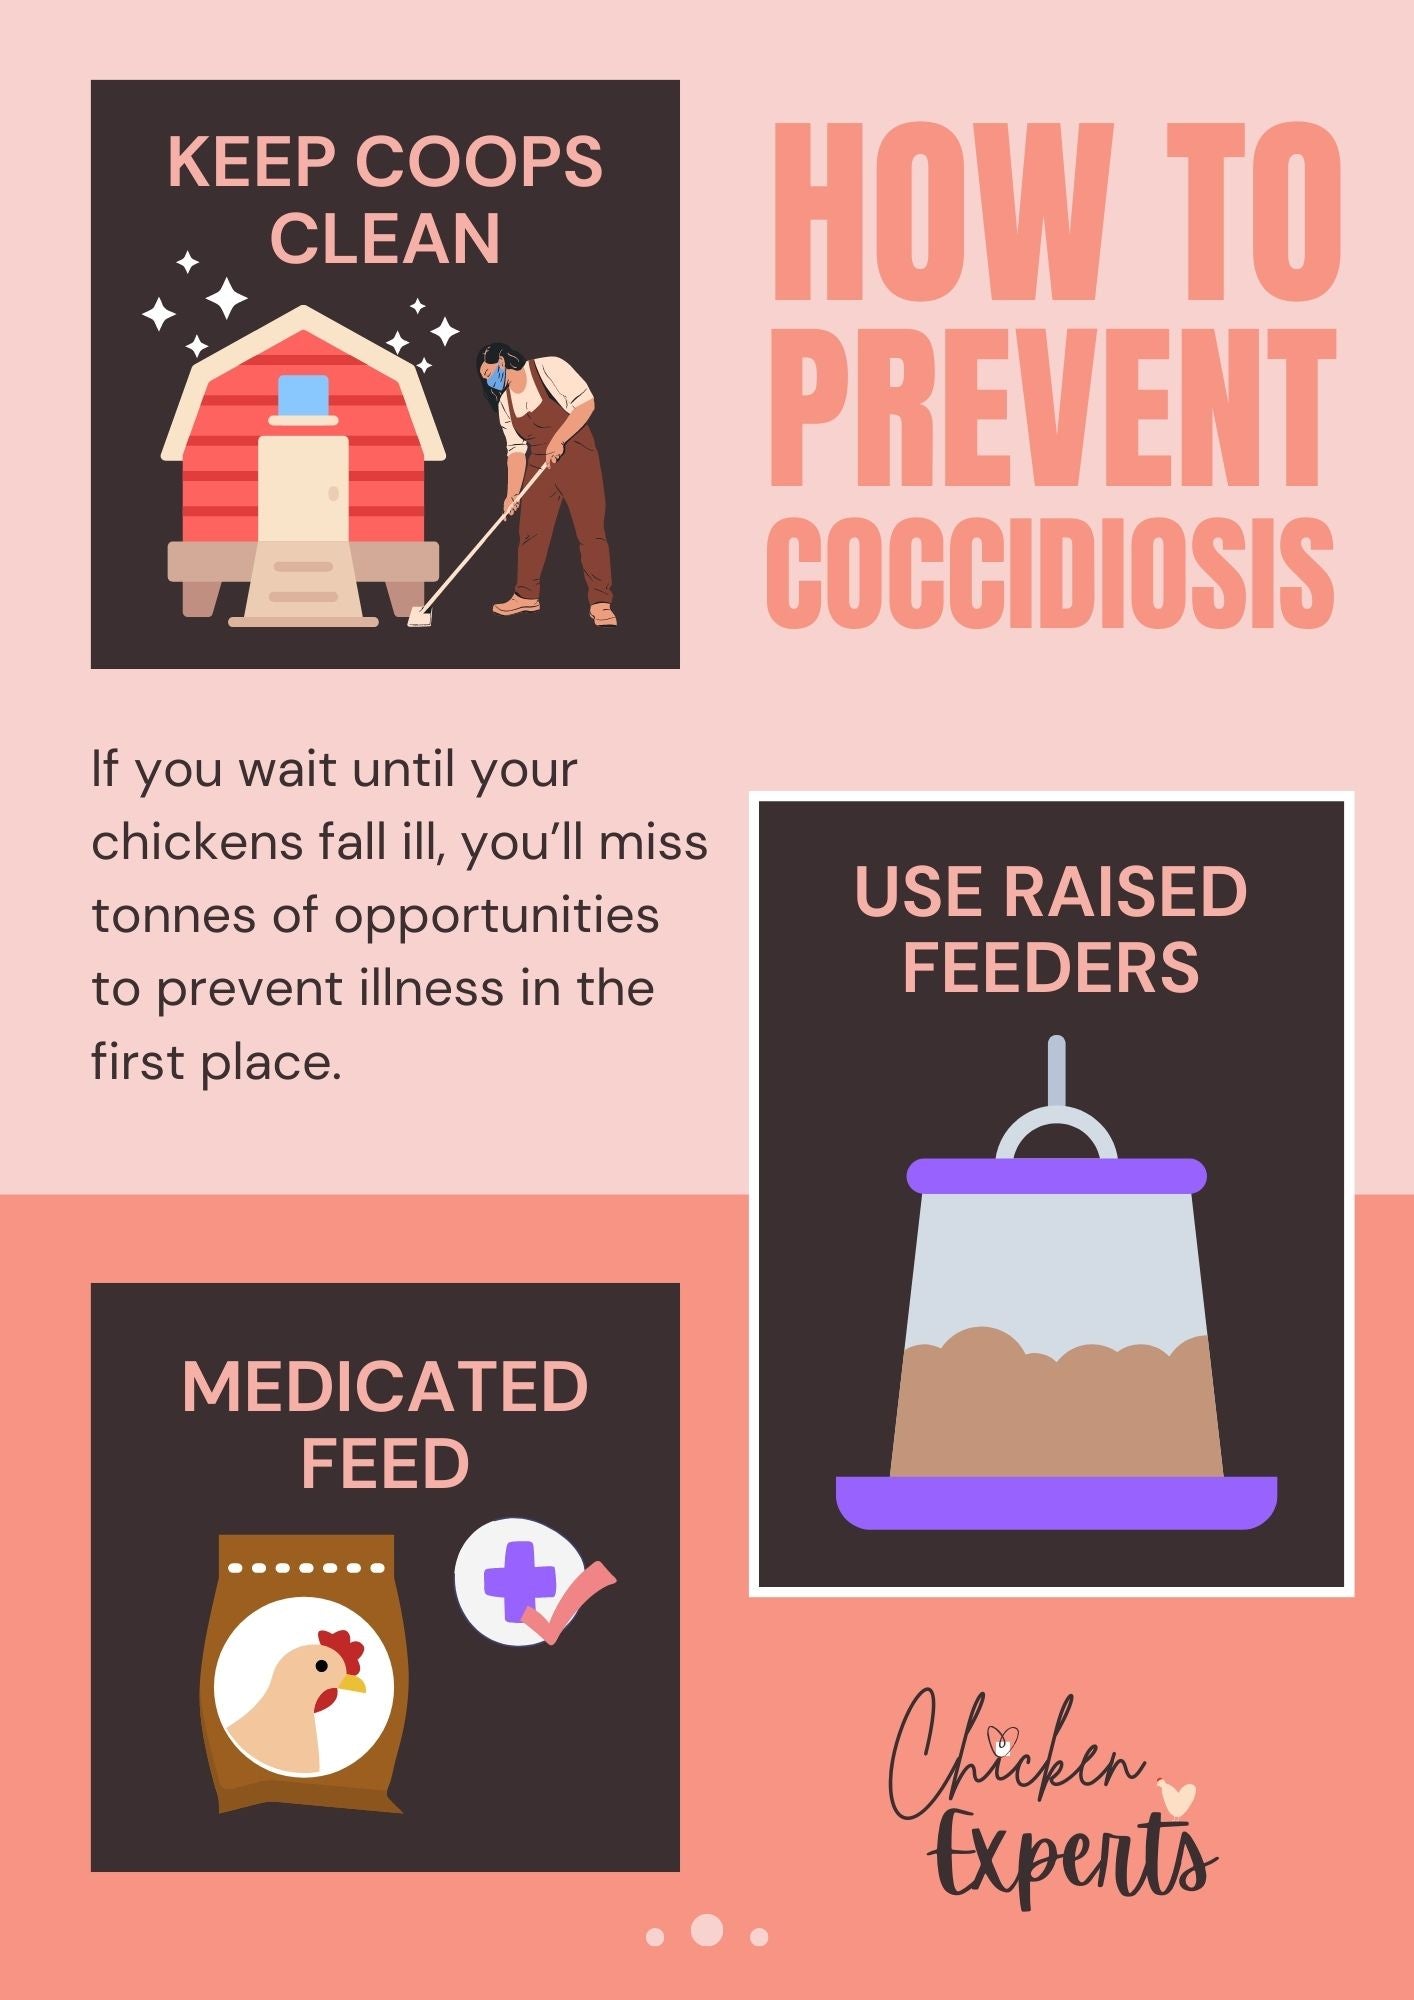 how to prevent coccidiosis